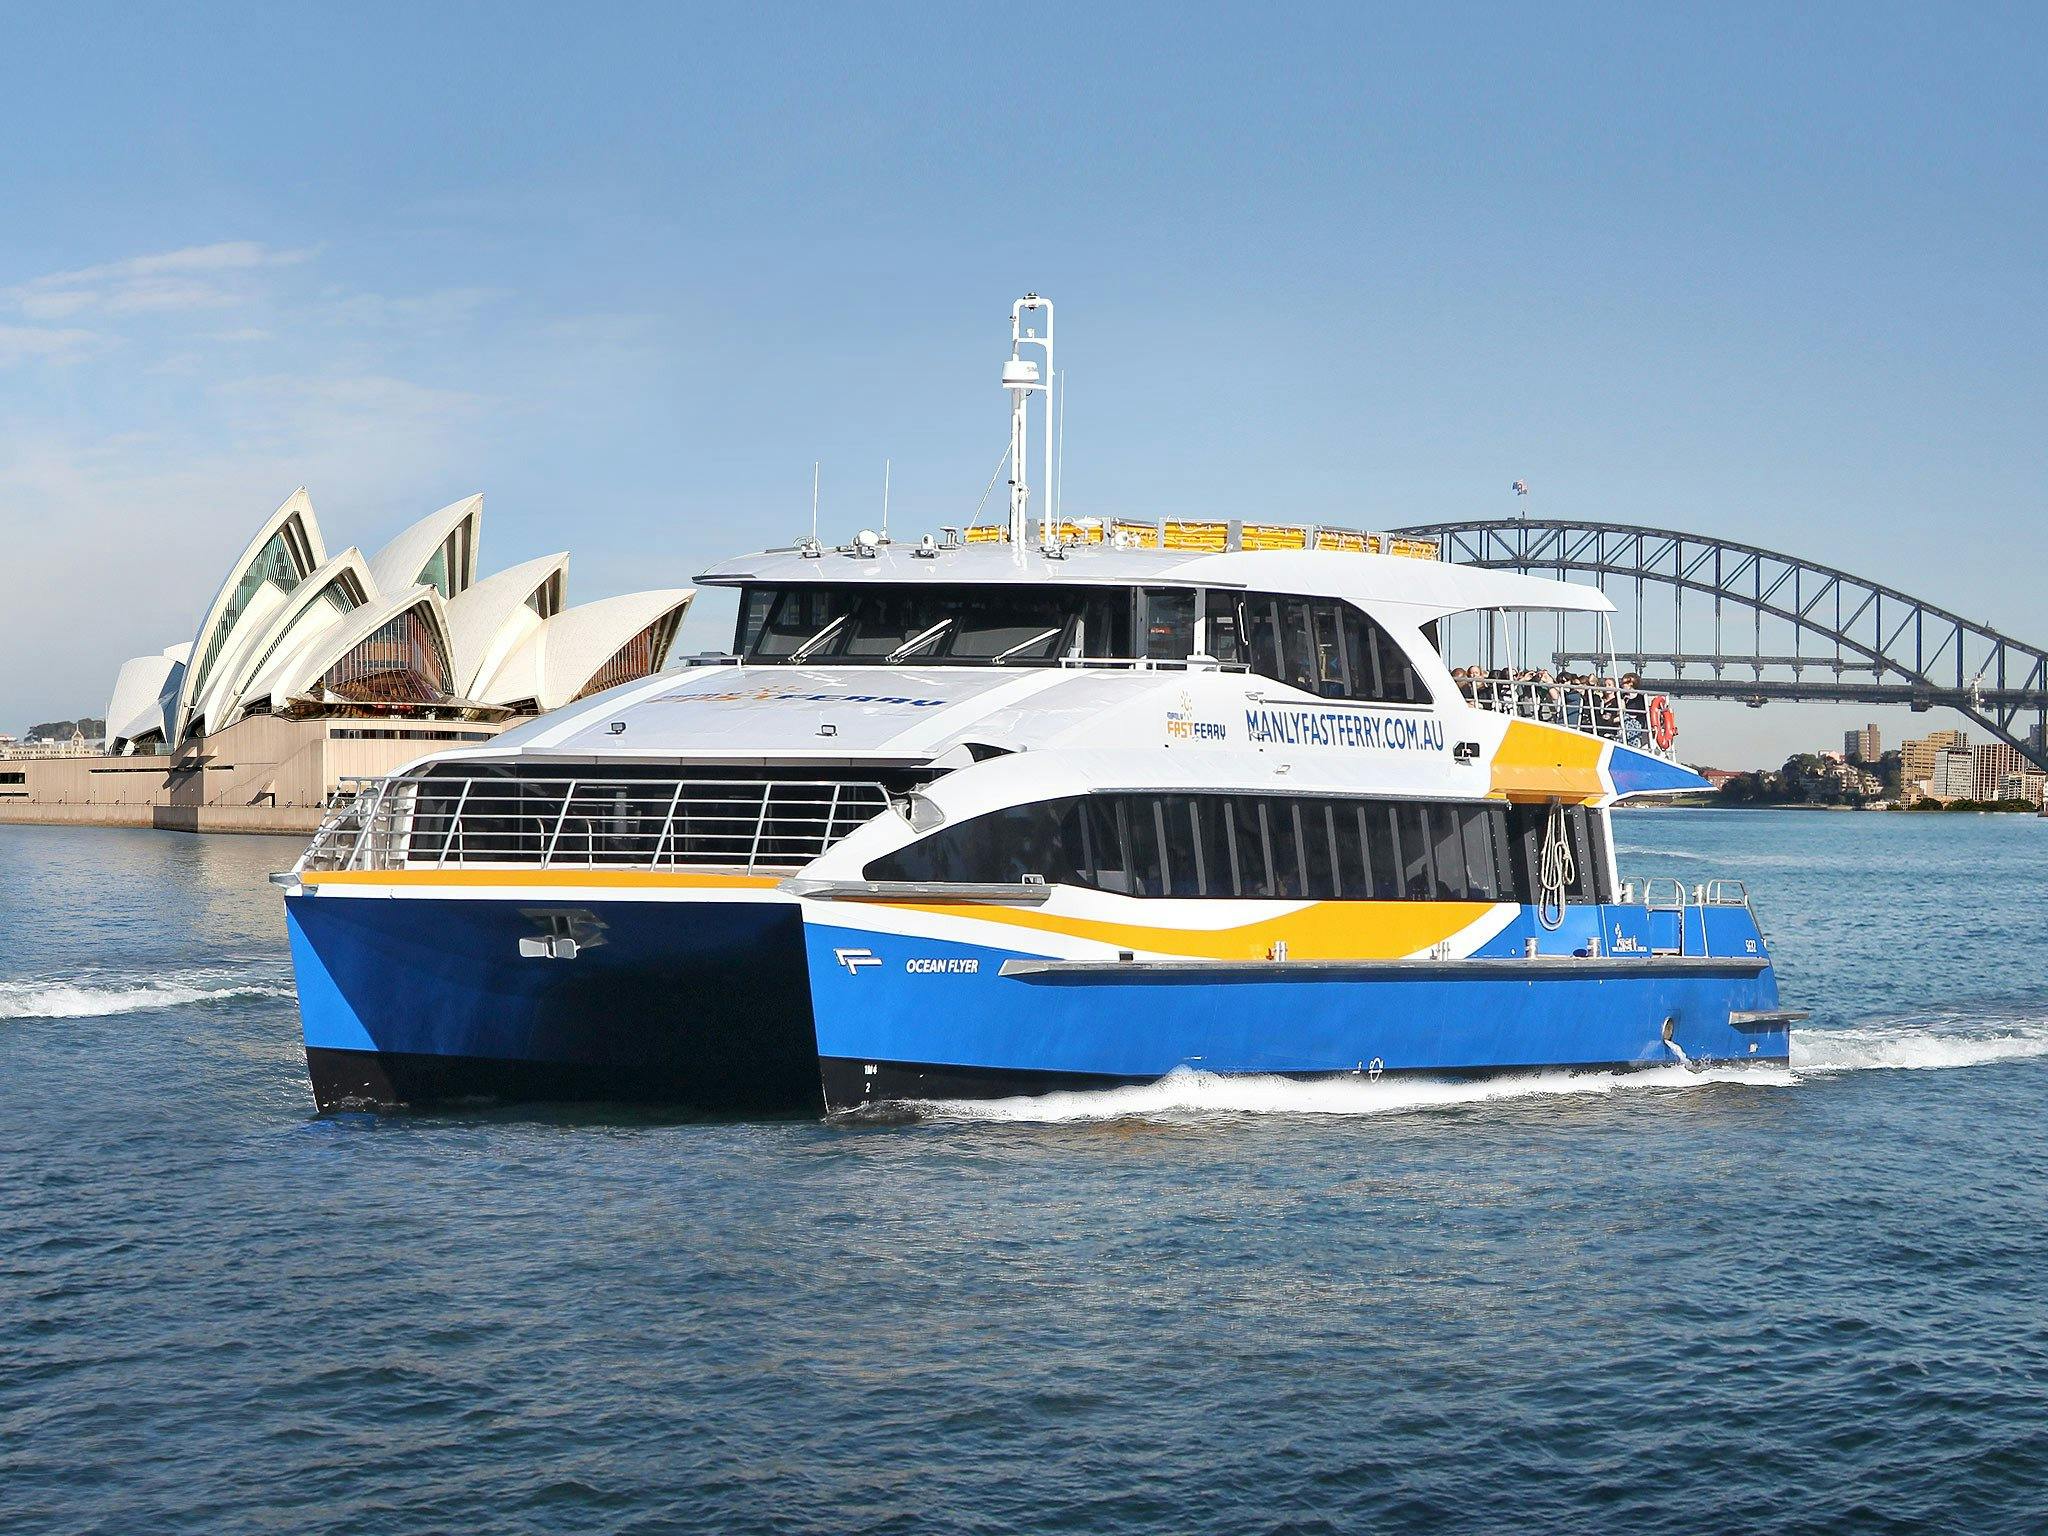 Manly Fast Ferry Sydney, Australia Official Travel &